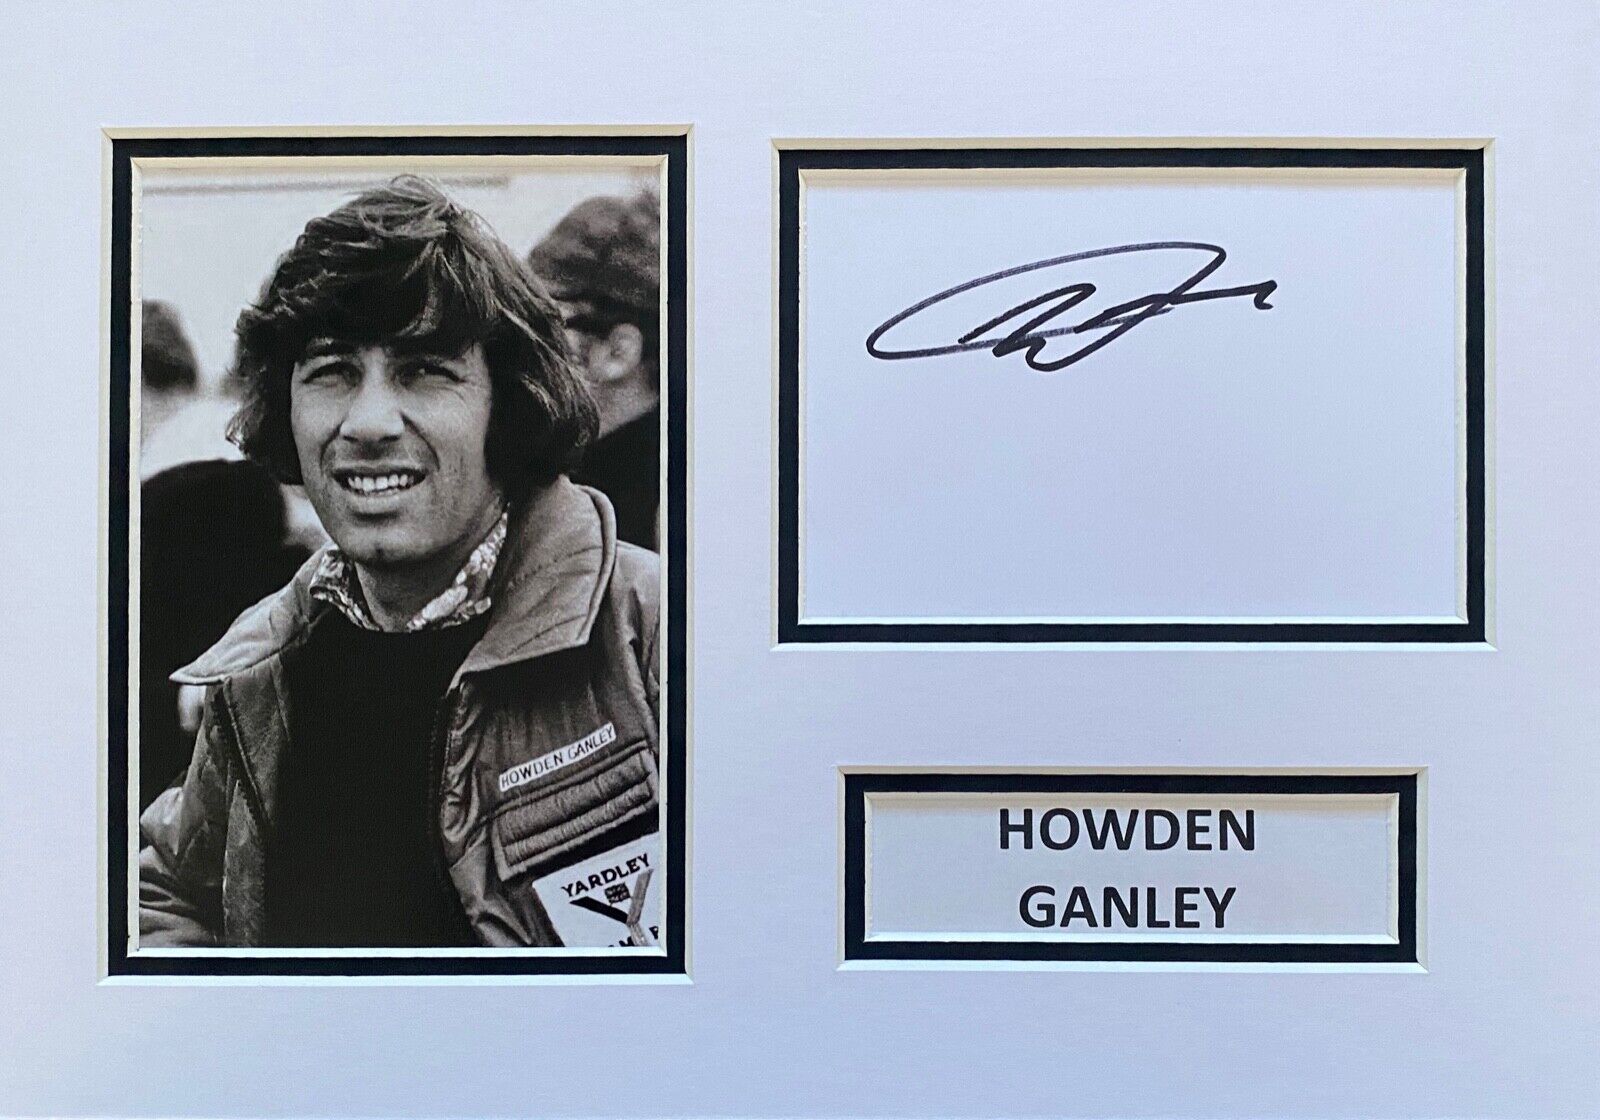 HOWDEN GANLEY HAND SIGNED A4 Photo Poster painting MOUNT DISPLAY FORMULA 1 AUTOGRAPH 4